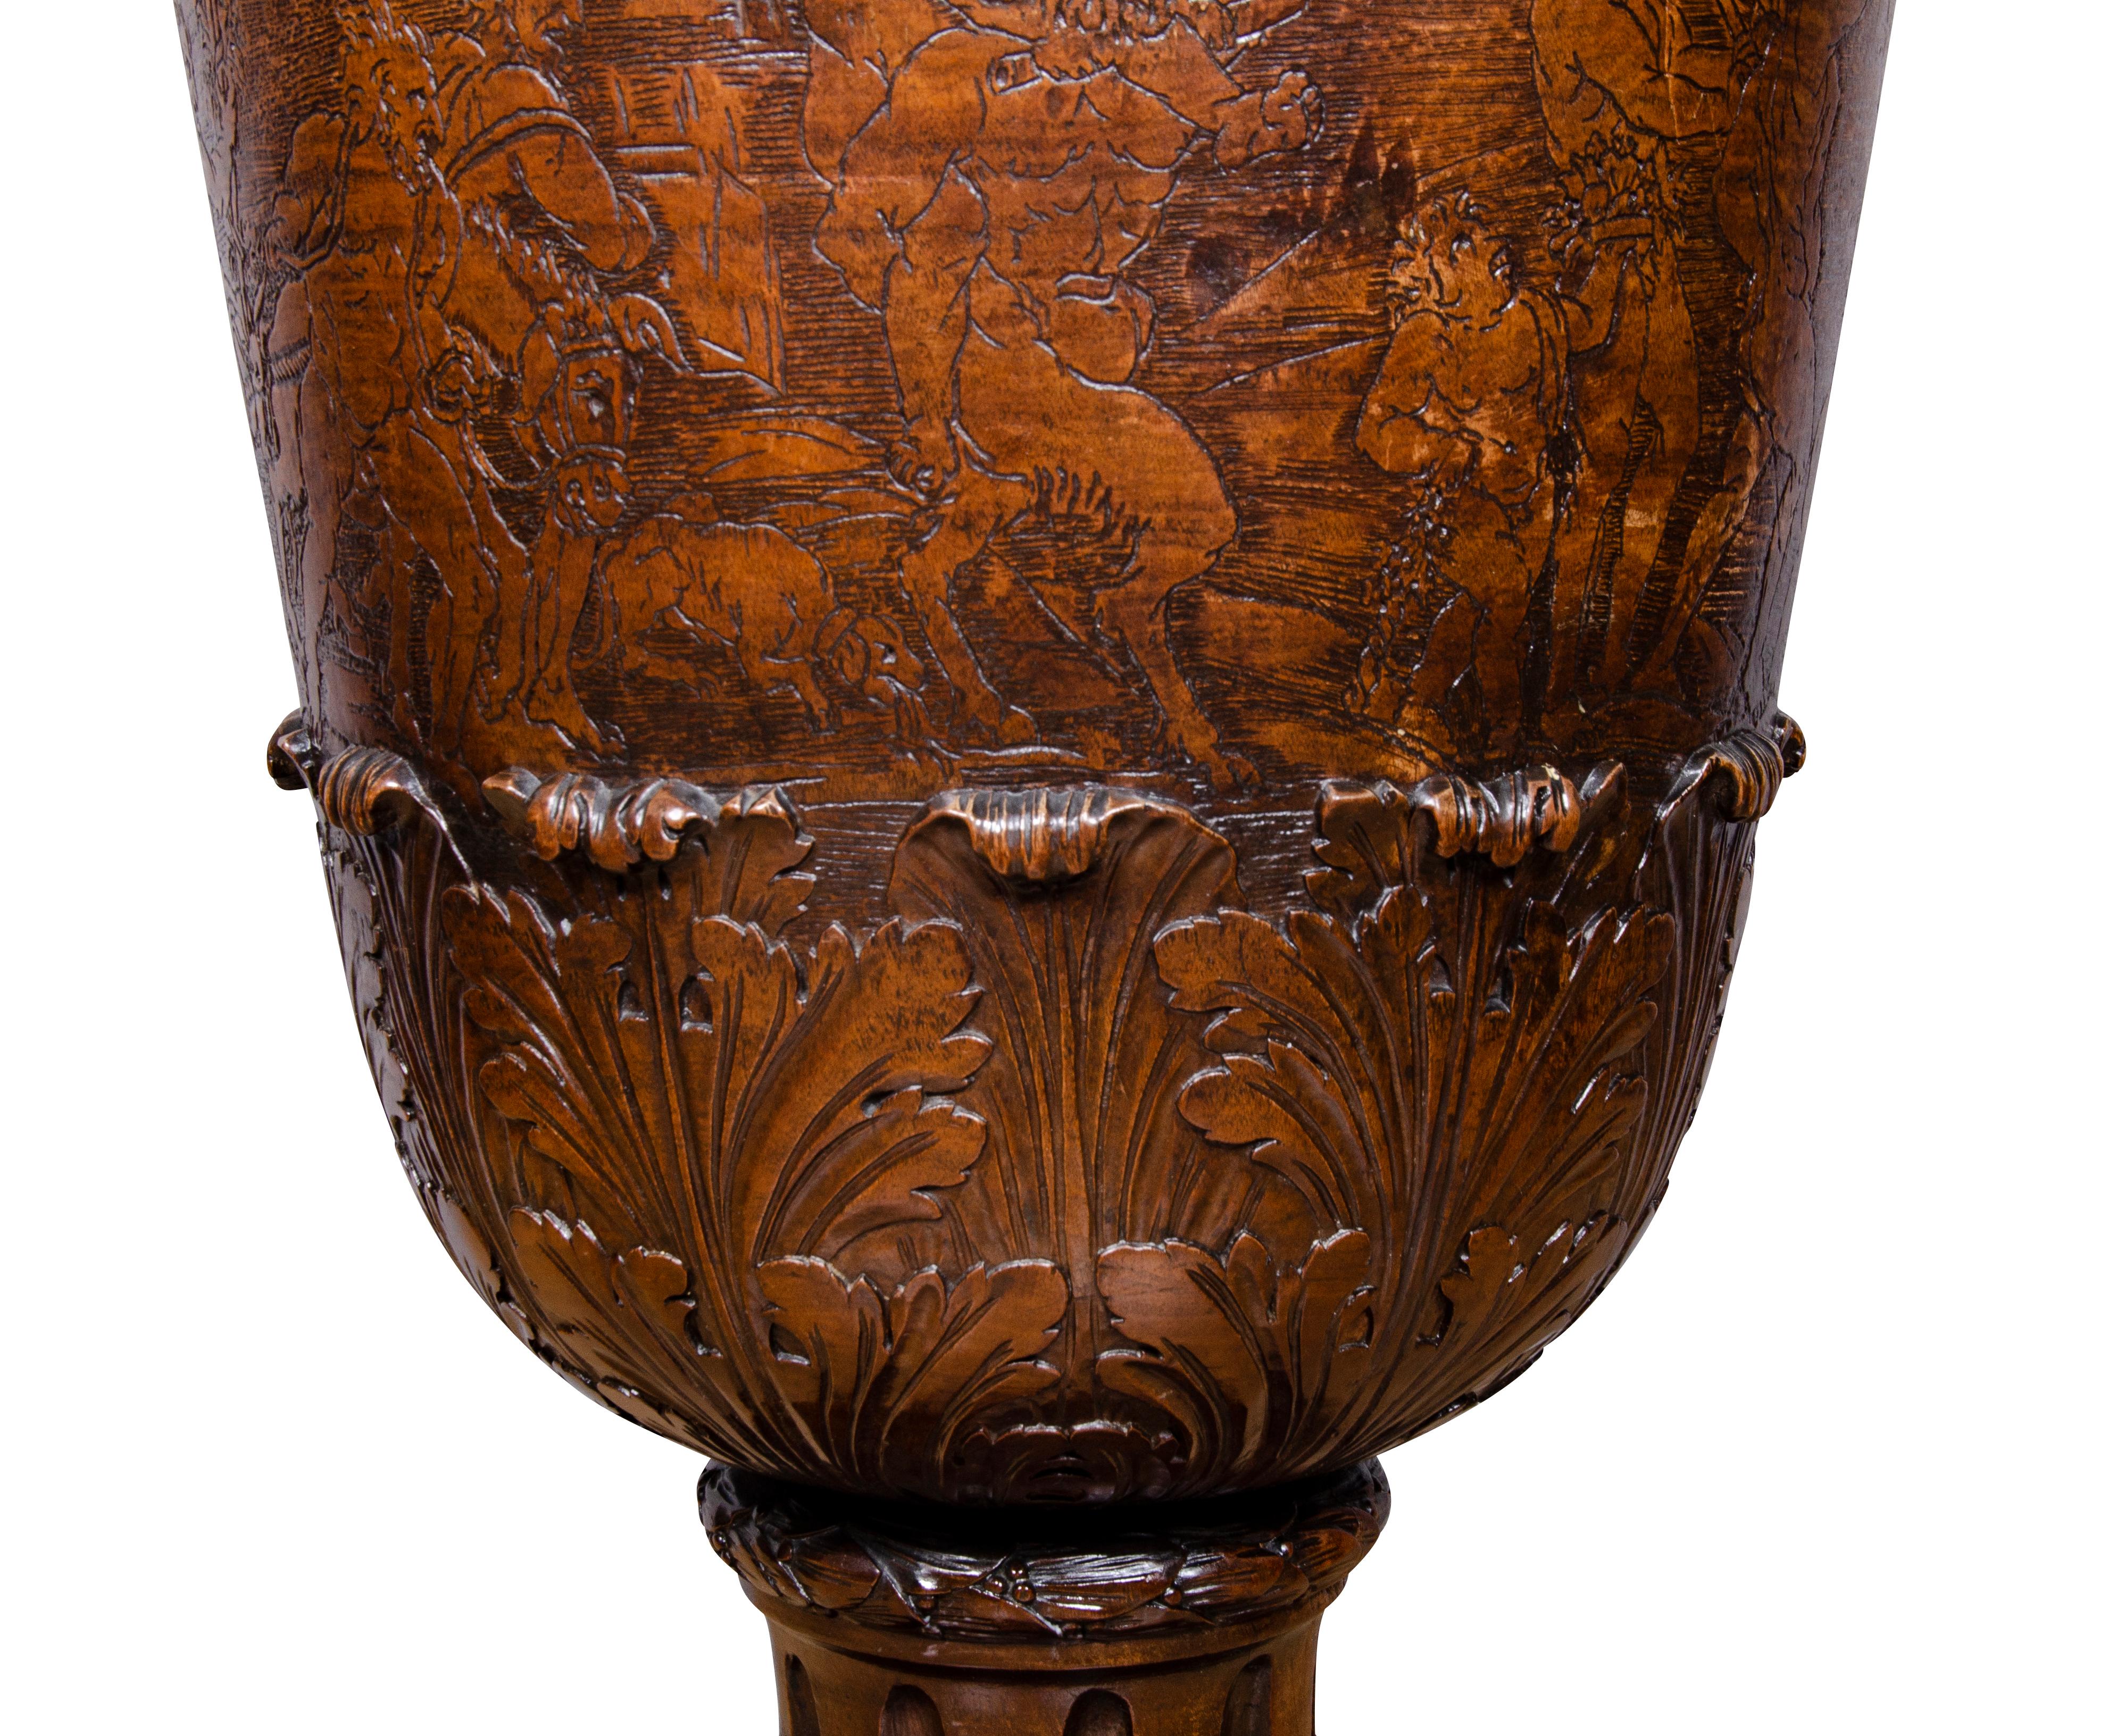 Large Georgian Mahogany Footed Urn In Good Condition For Sale In Essex, MA